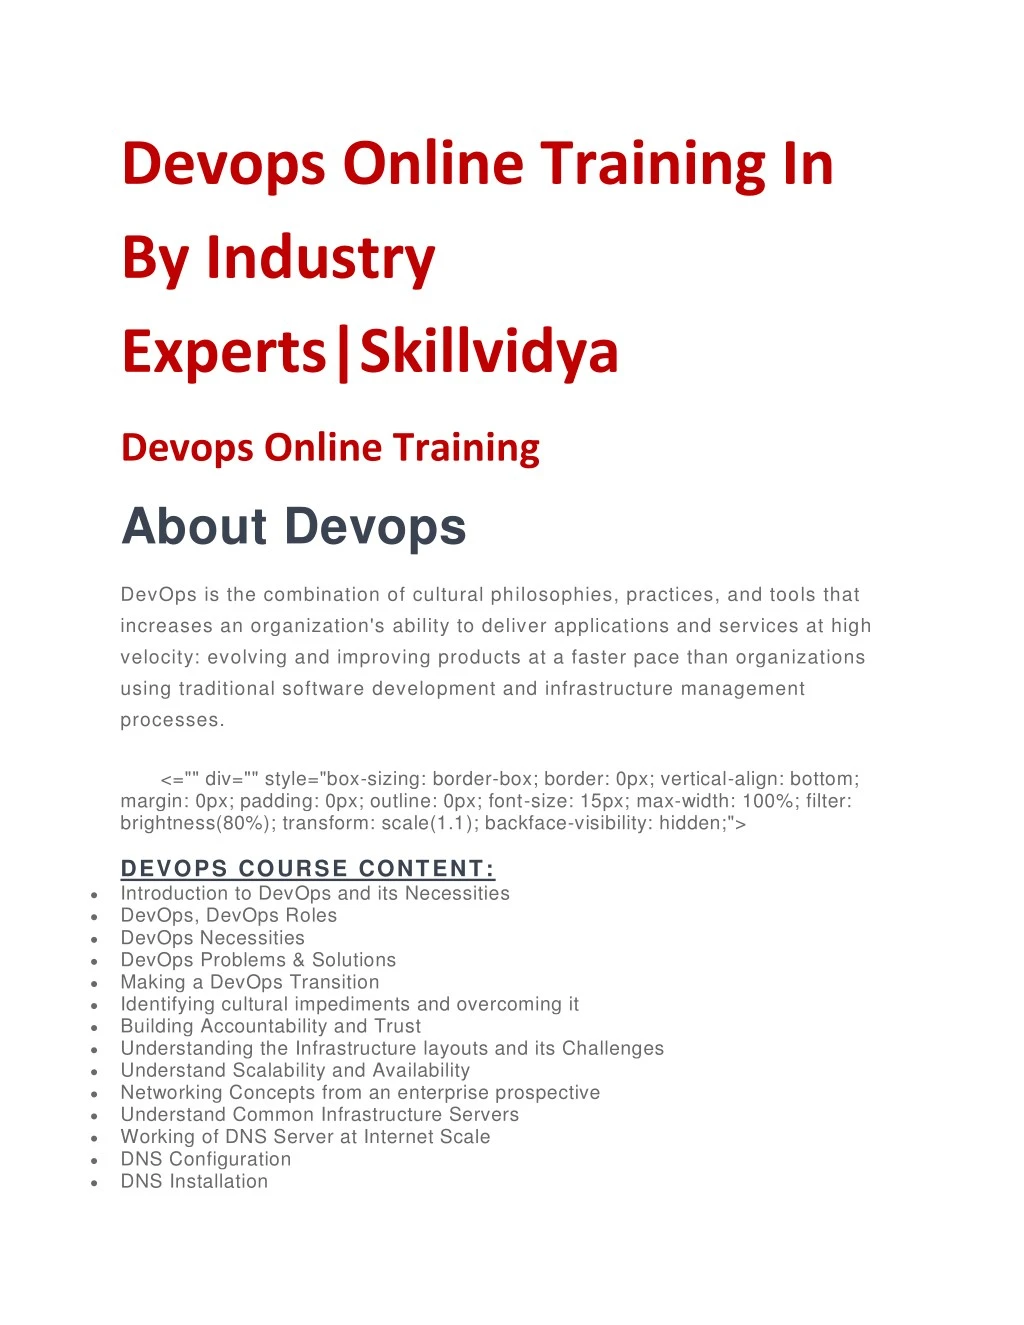 devops online training in by industry experts